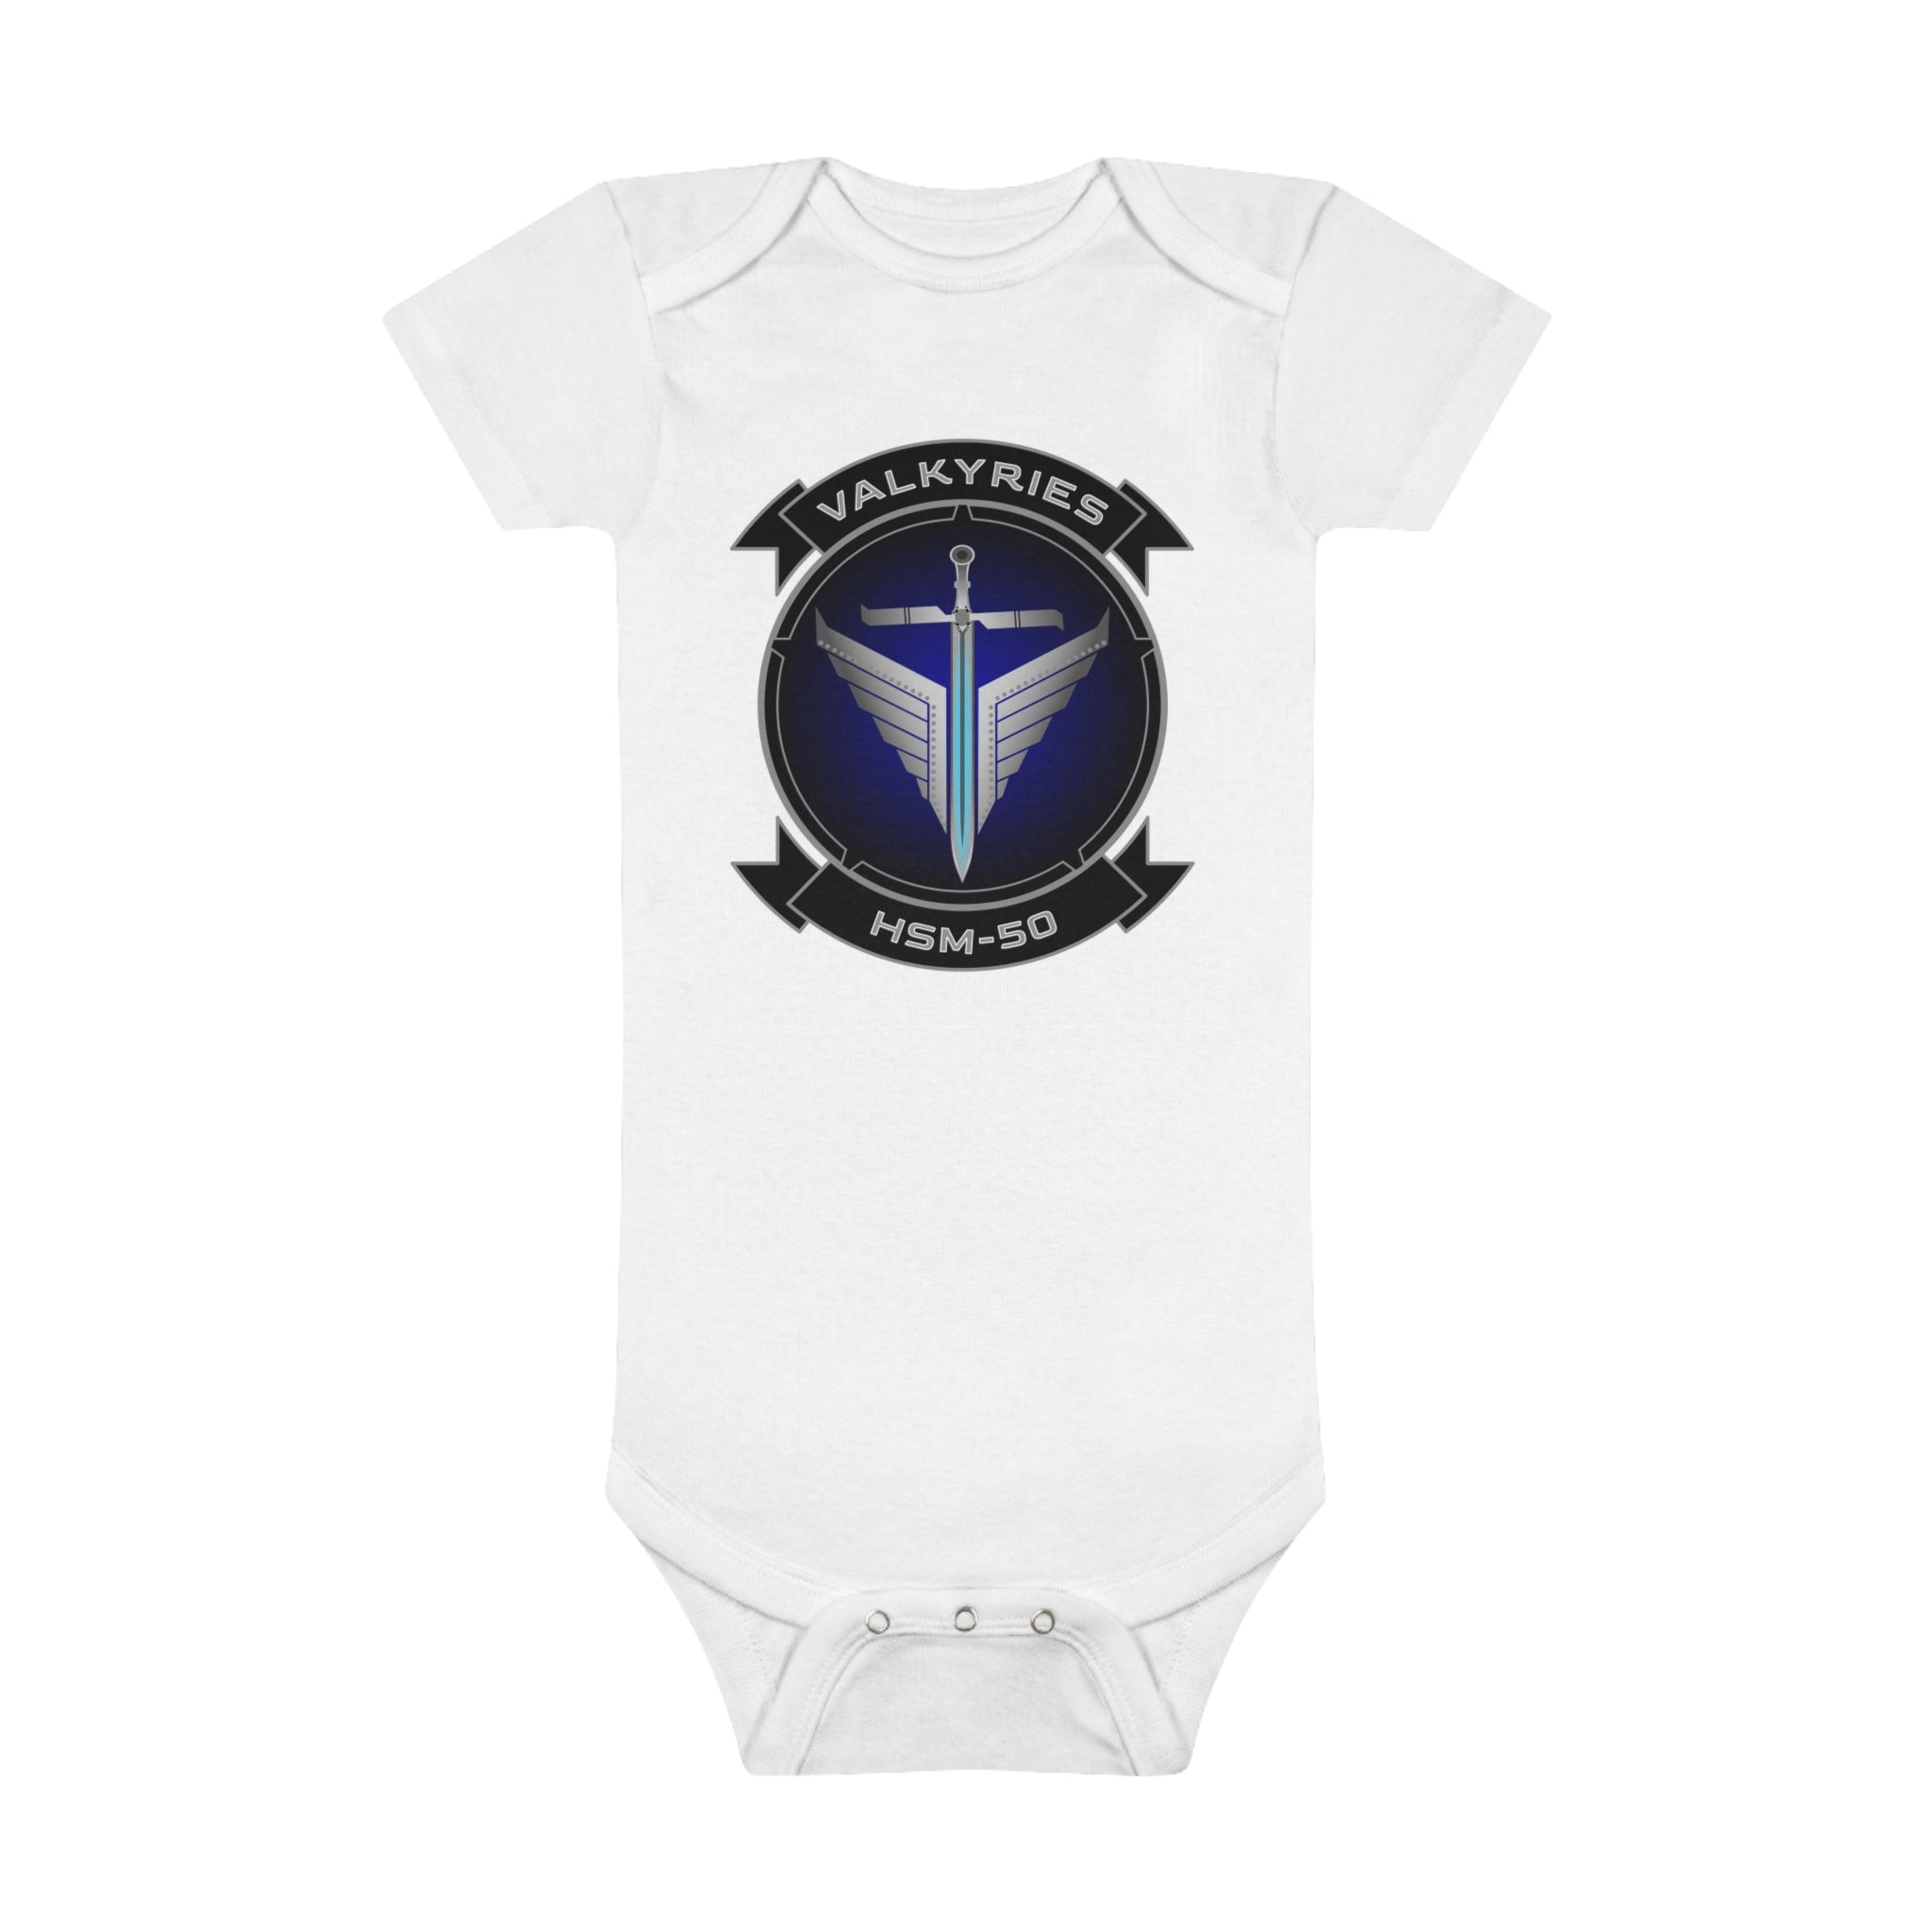 HSM-50 "Valkyries: Onesie® Organic Baby Bodysuit Navy Helicopter Maritime Strike Squadron flying the MH-60R Seahawk